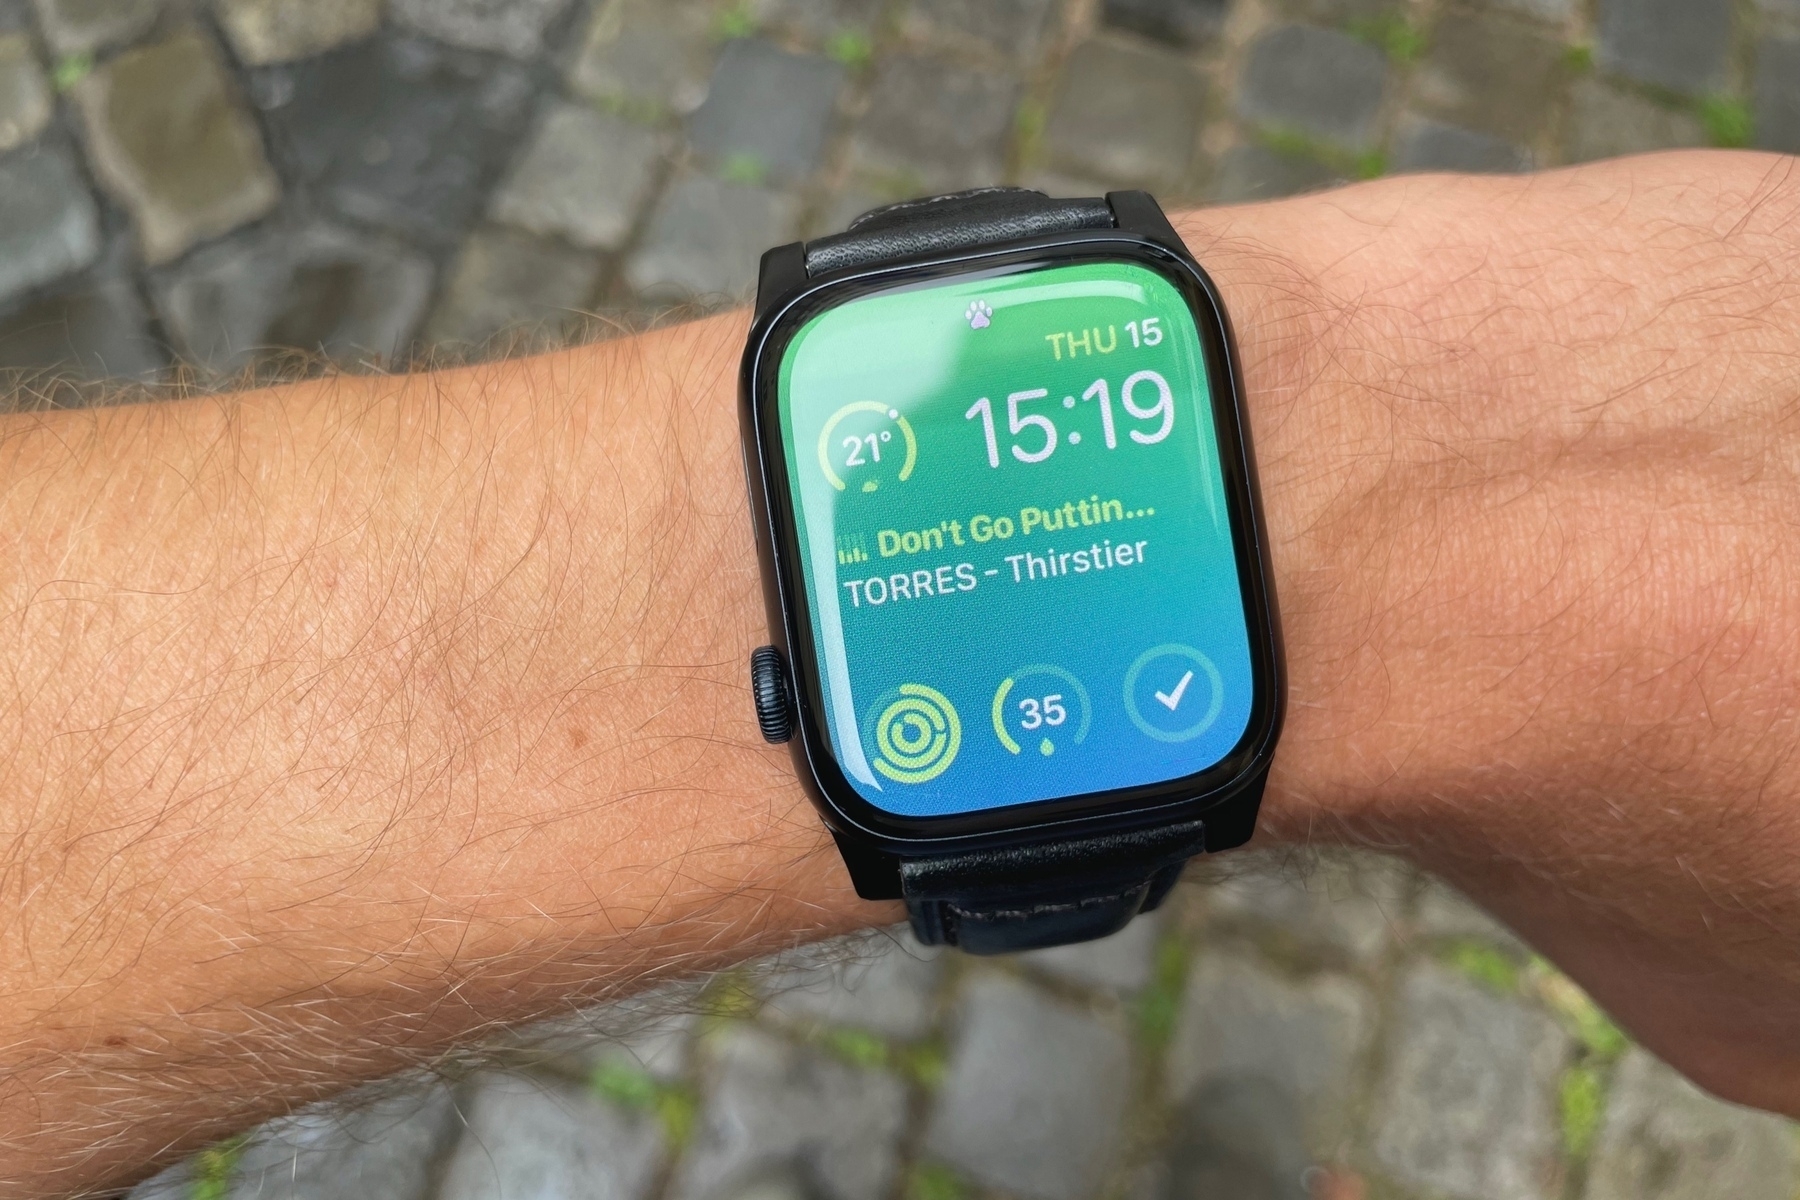 Arm wearing an Apple Watch with Modular face and a green to blue gradient background